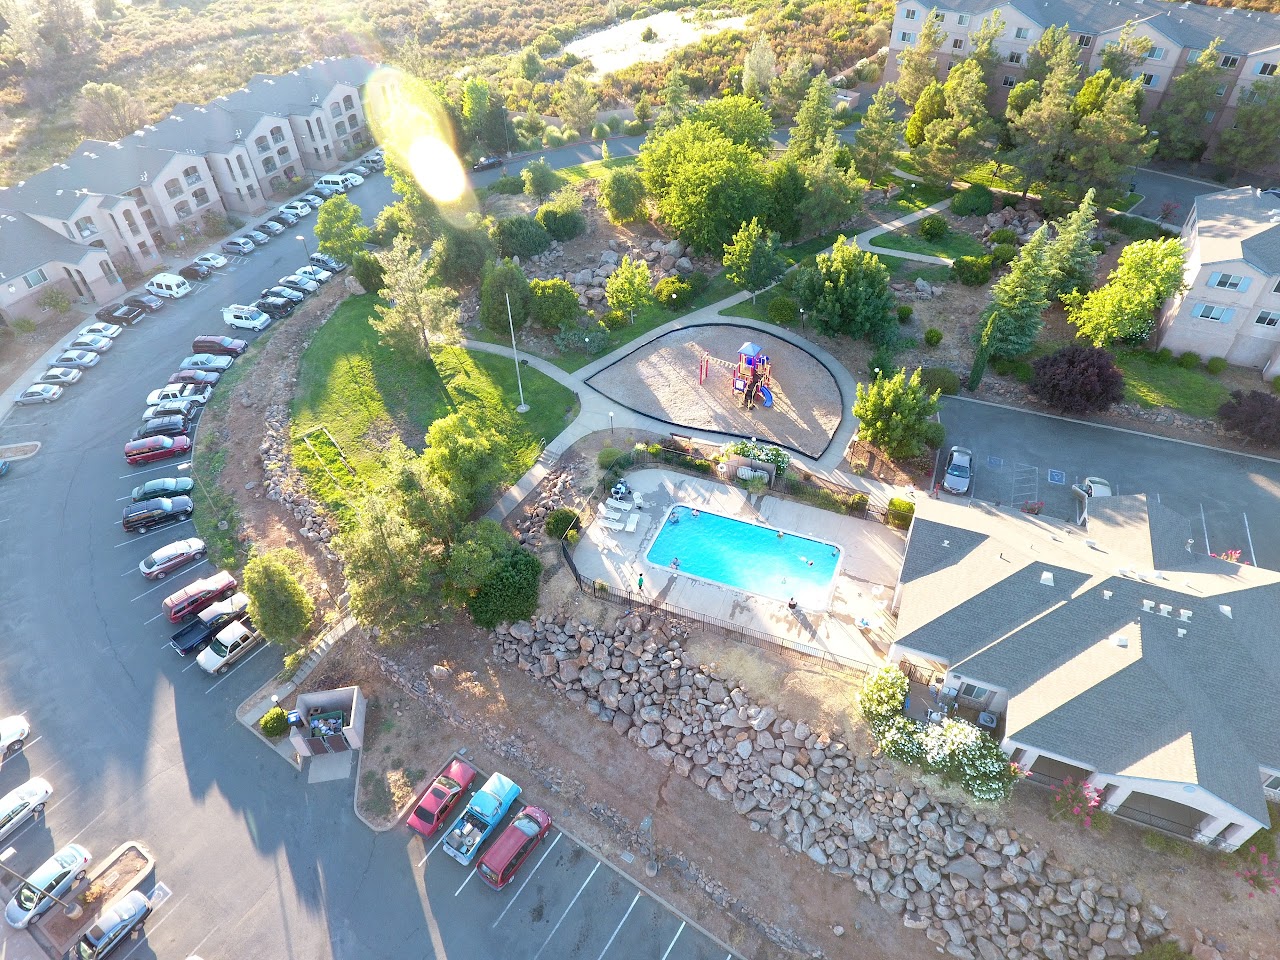 Photo of CACHE CREEK APTS HOMES at 16080 DAM RD CLEARLAKE, CA 95422